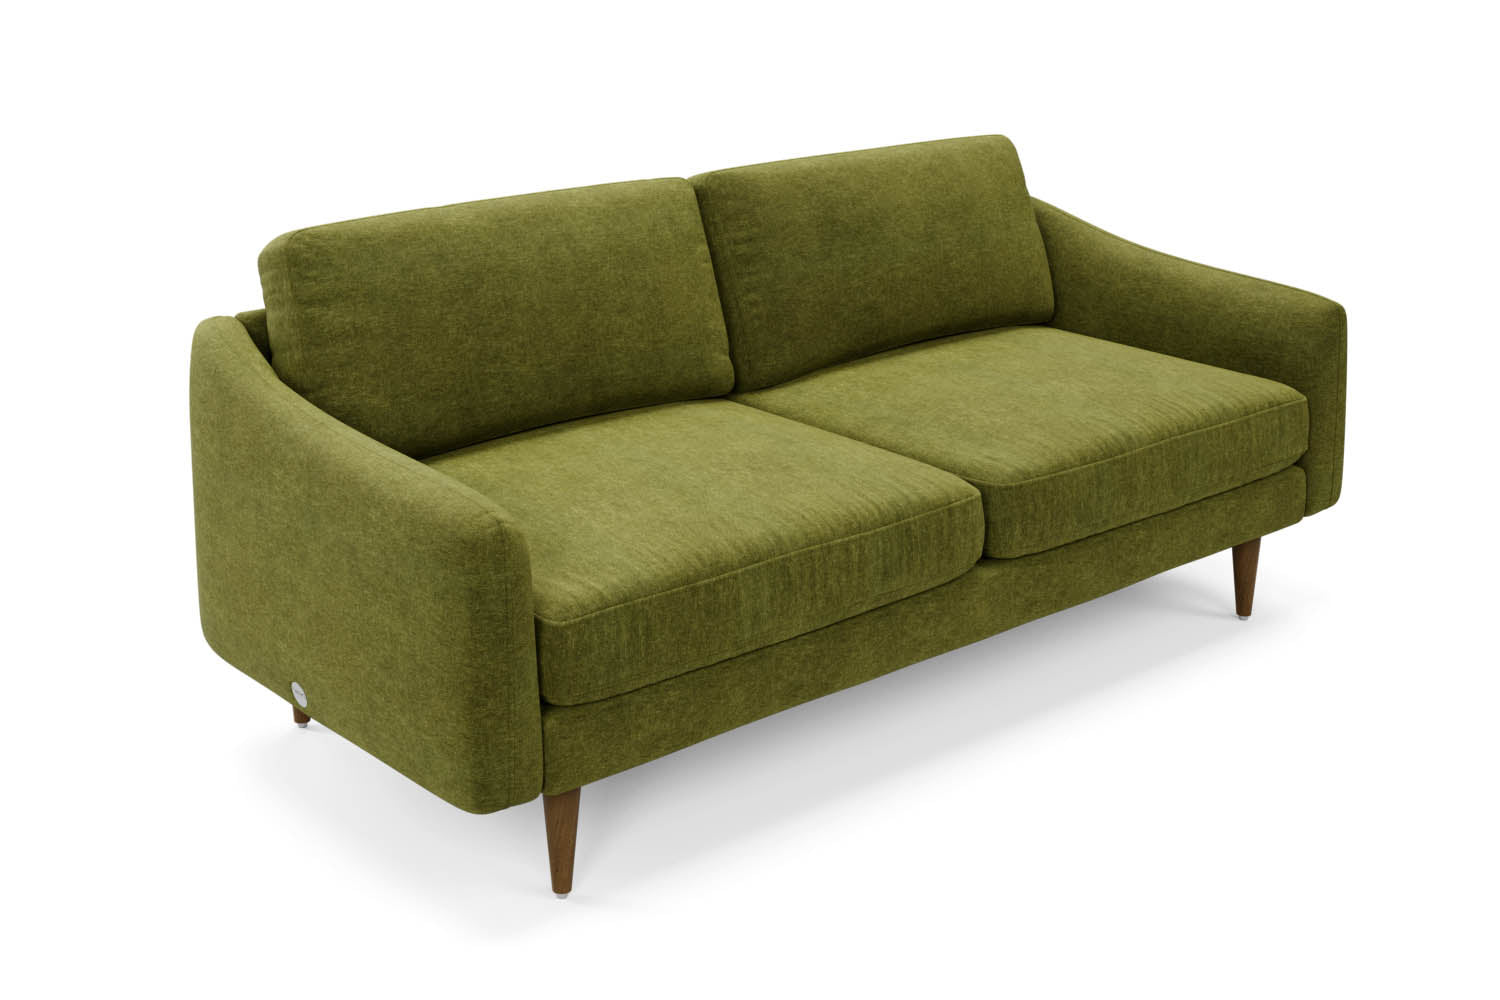 The Rebel 3 Seater Sofa in Moss with brown legs